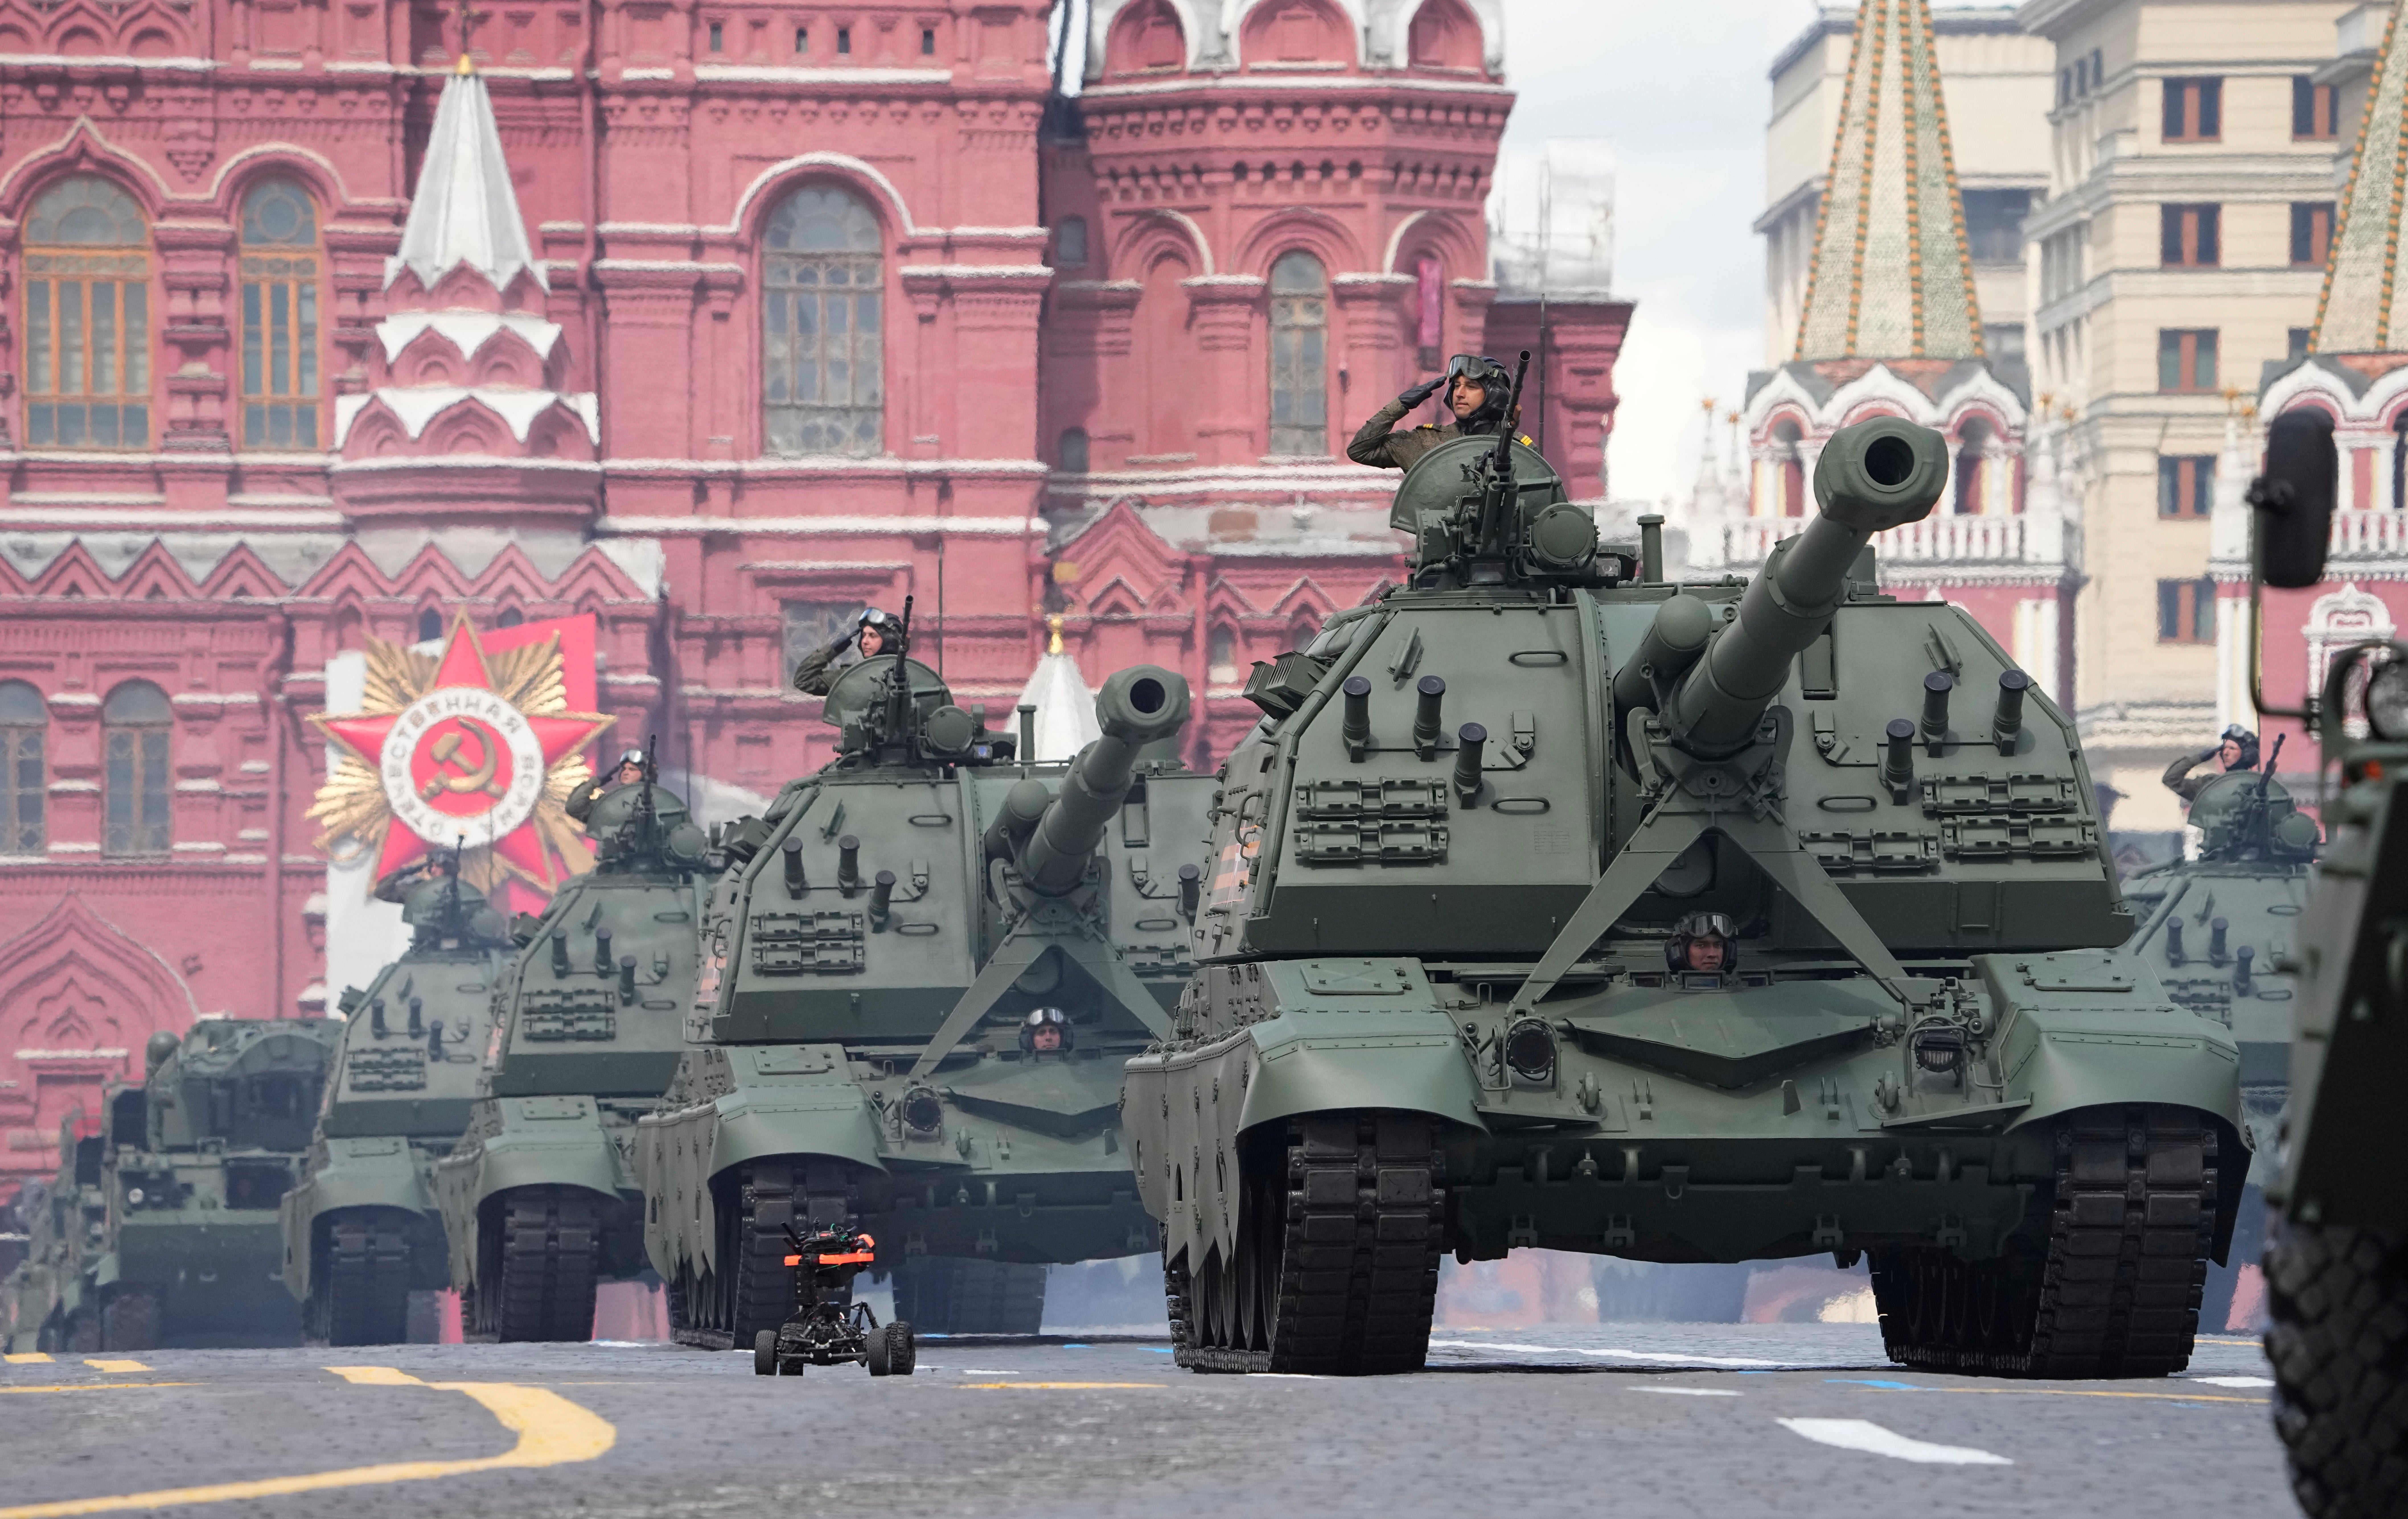 Russian self-propelled artillery vehicles roll during the Victory Day military parade in Moscow, Russia, Monday, May 9, 2022, marking the 77th anniversary of the end of World War II. (AP Photo/Alexander Zemlianichenko)